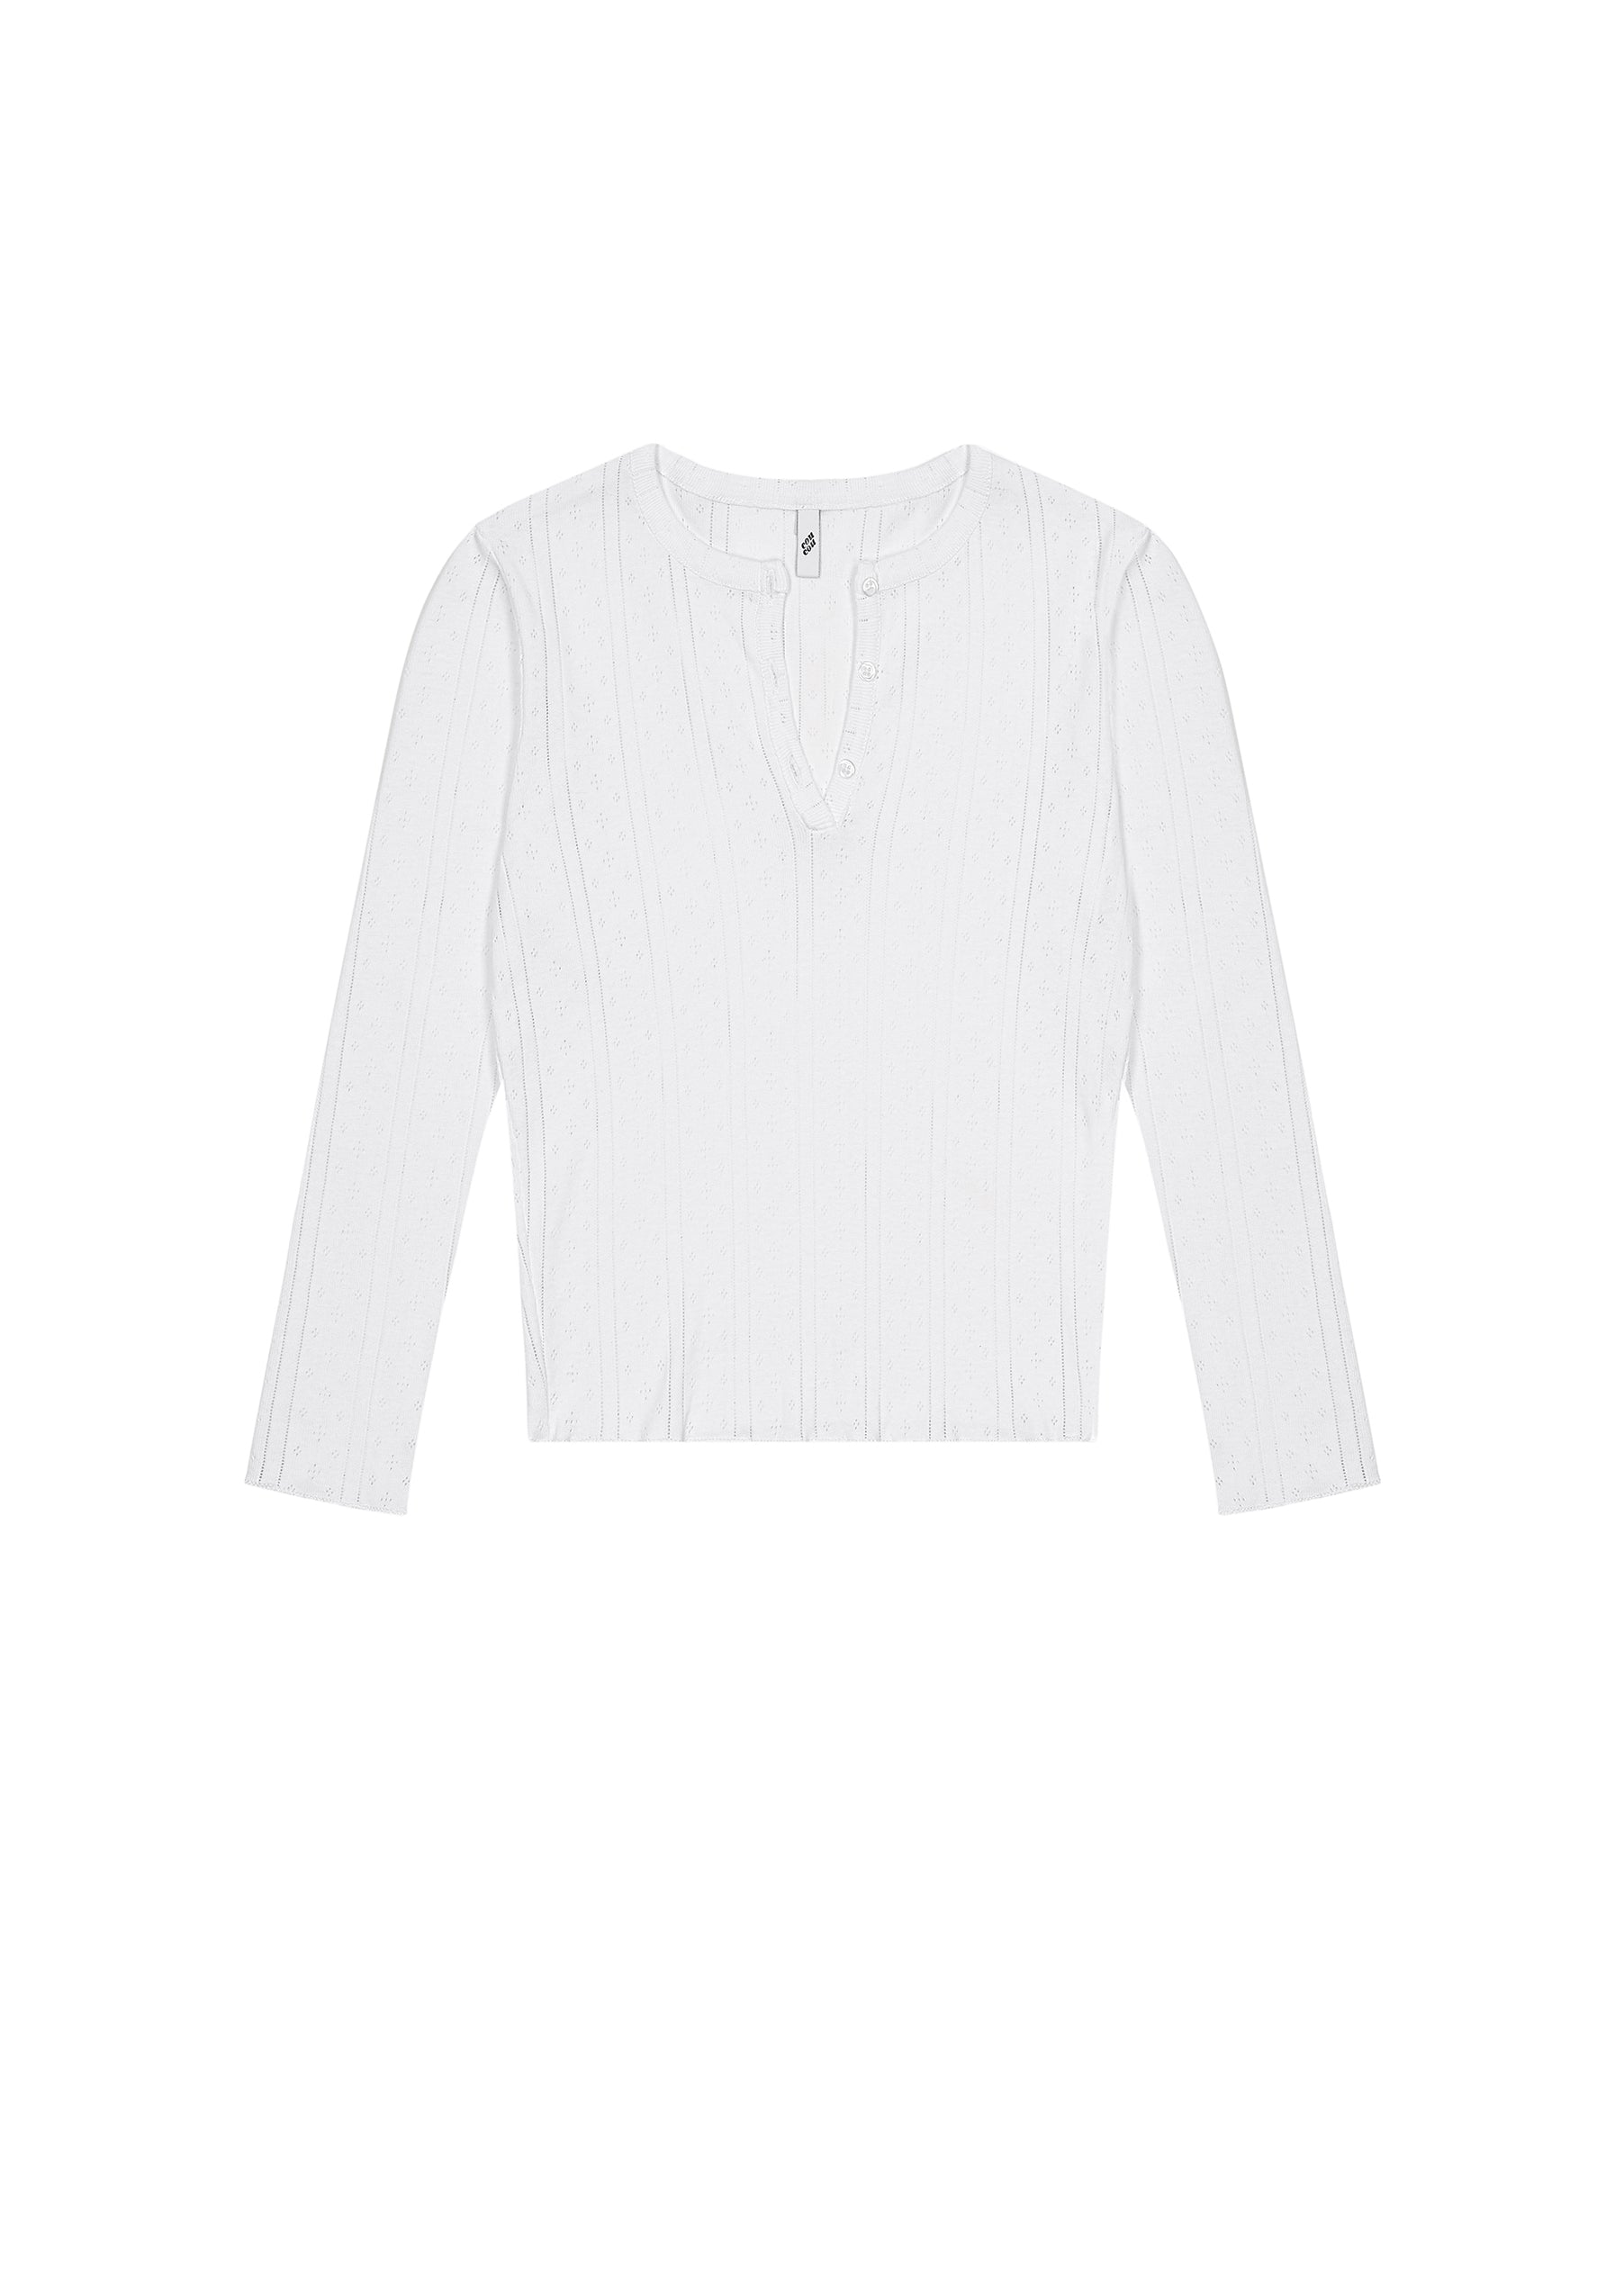 The Baby Henley White